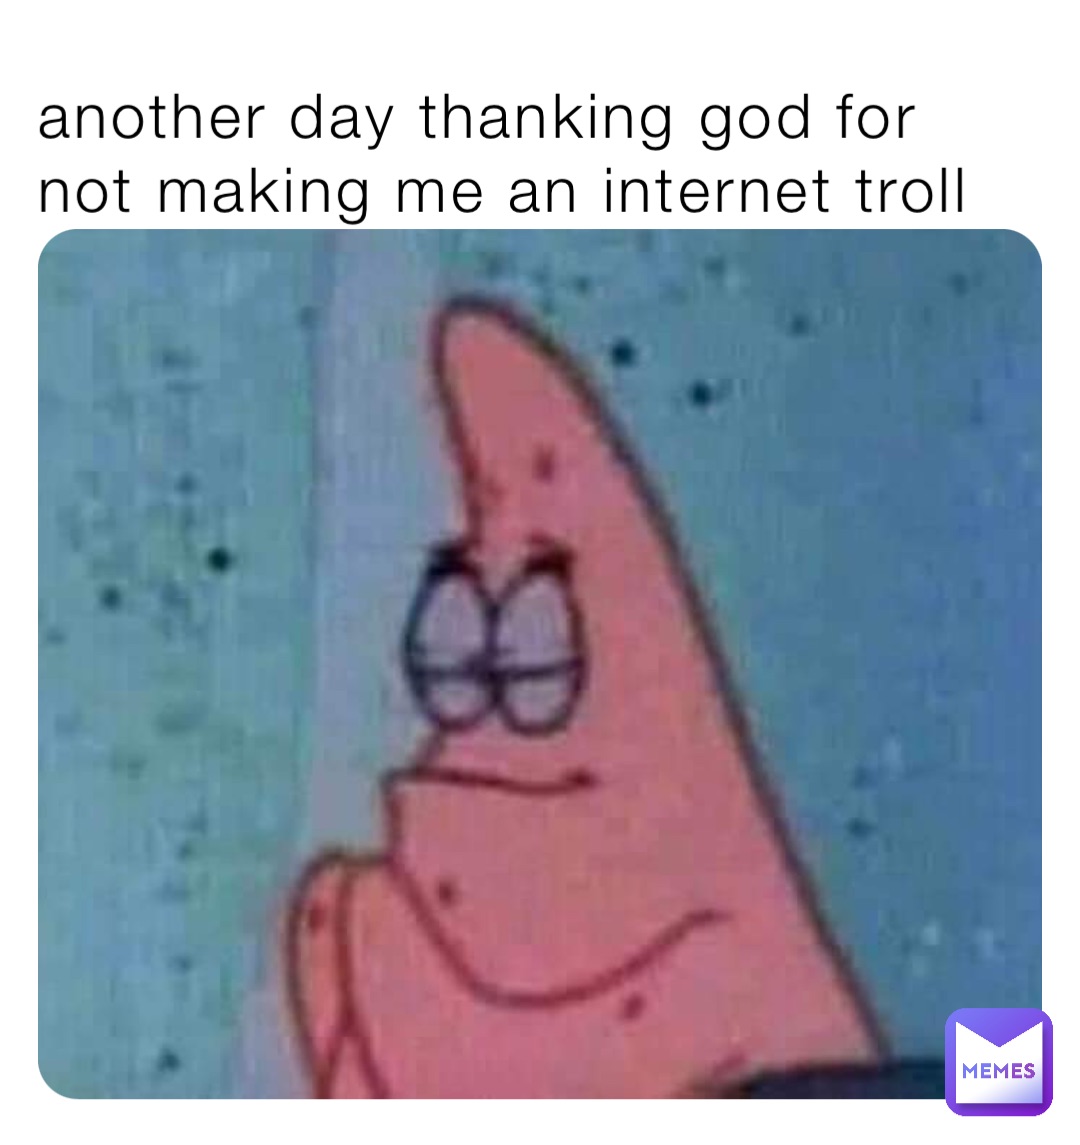 another day thanking god for not making me an internet troll